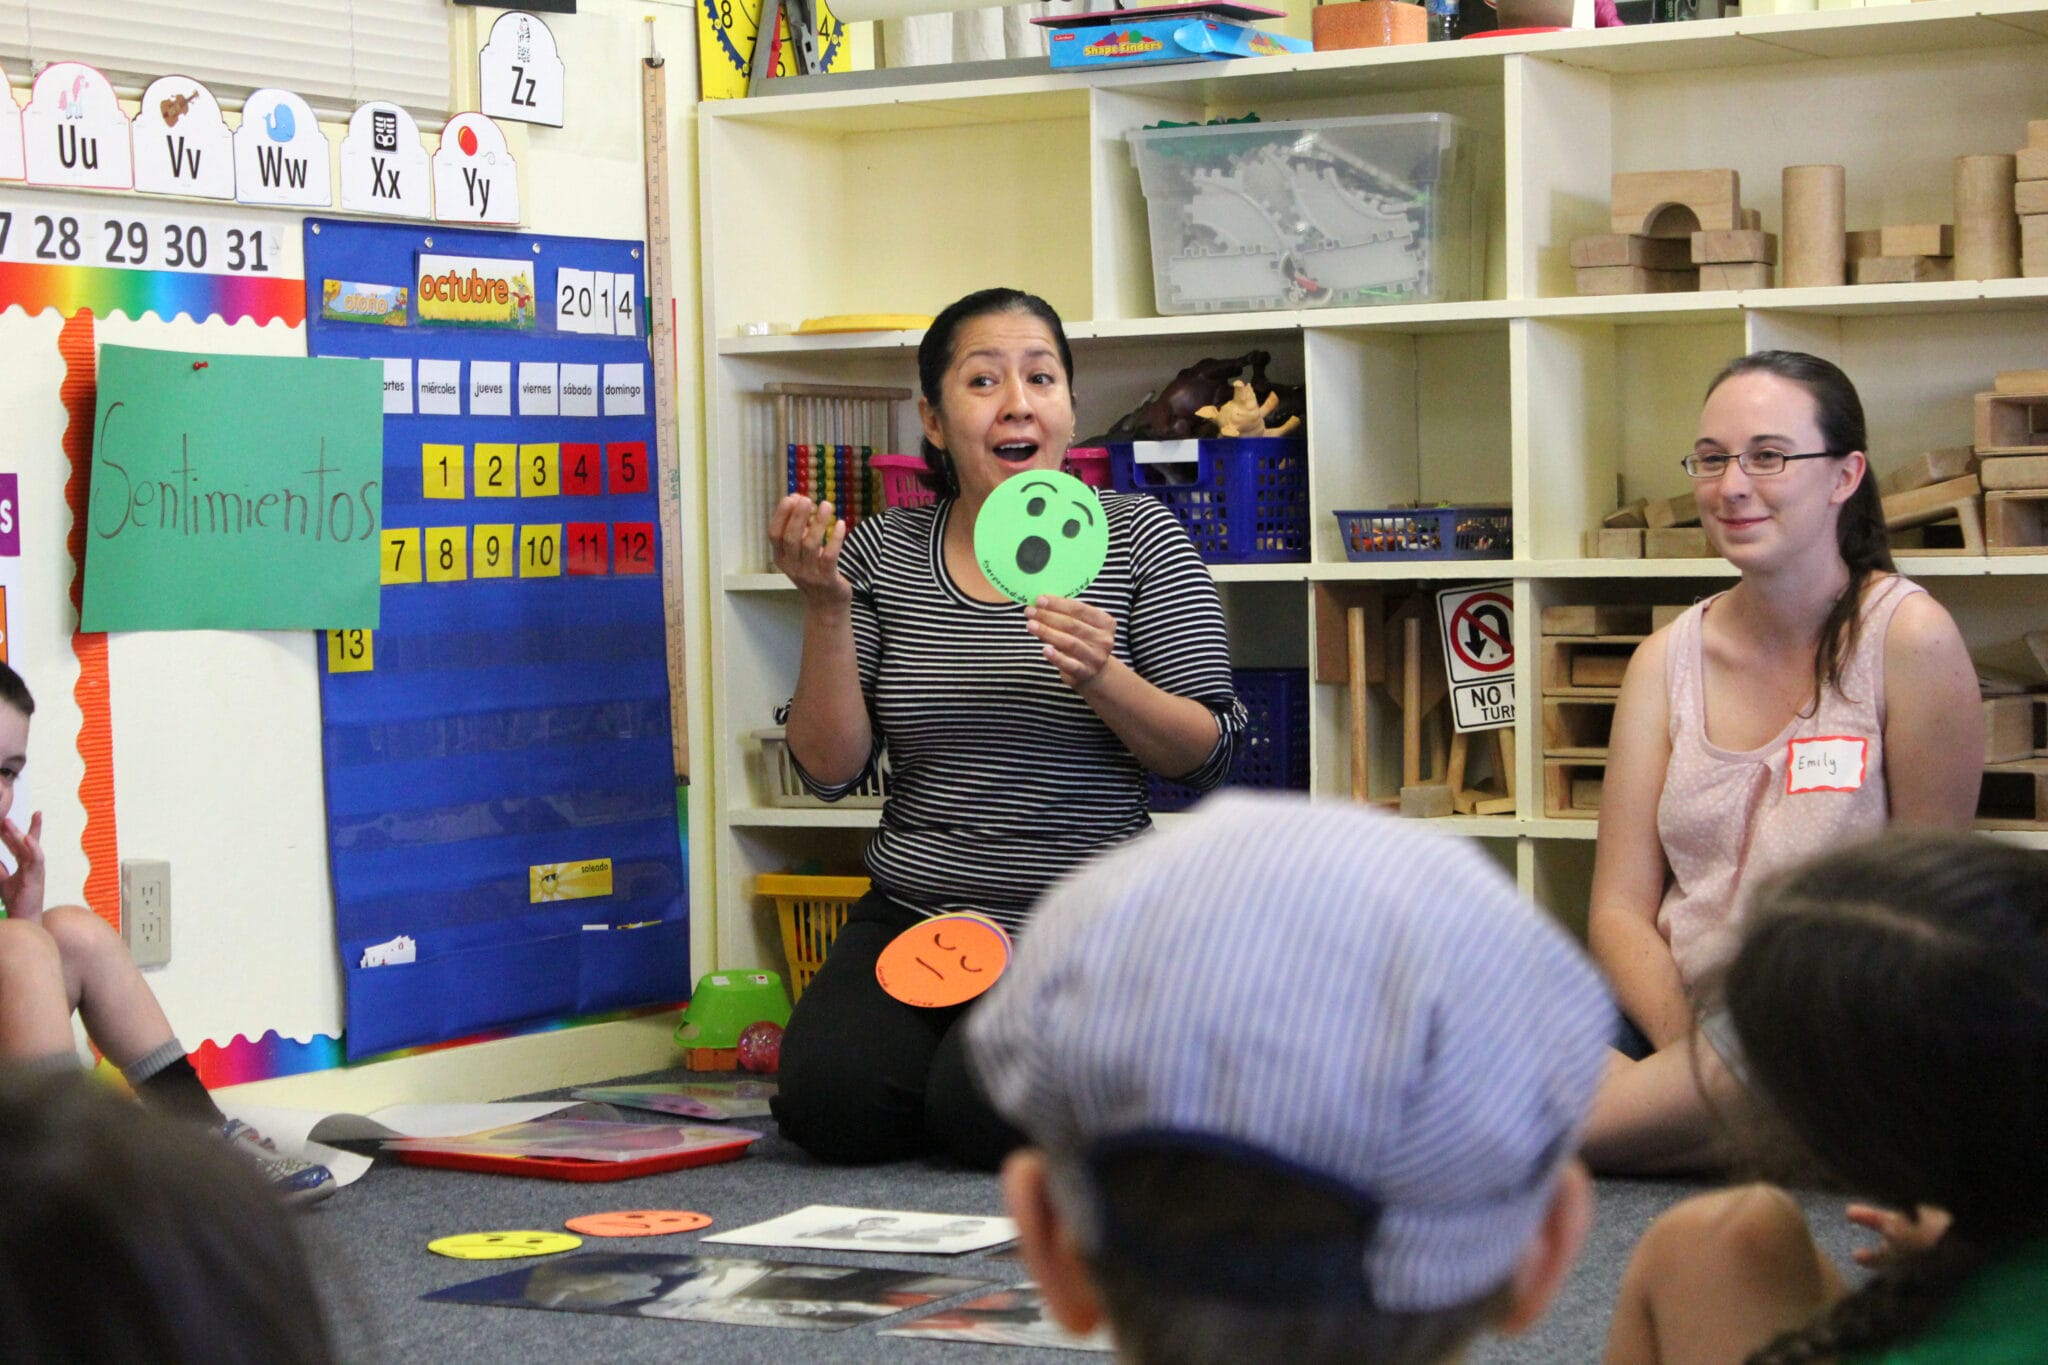 An early educator surrounded by children holds up a green smiley face cue card with a joyful expression. A sign behind her says “sentimientos.